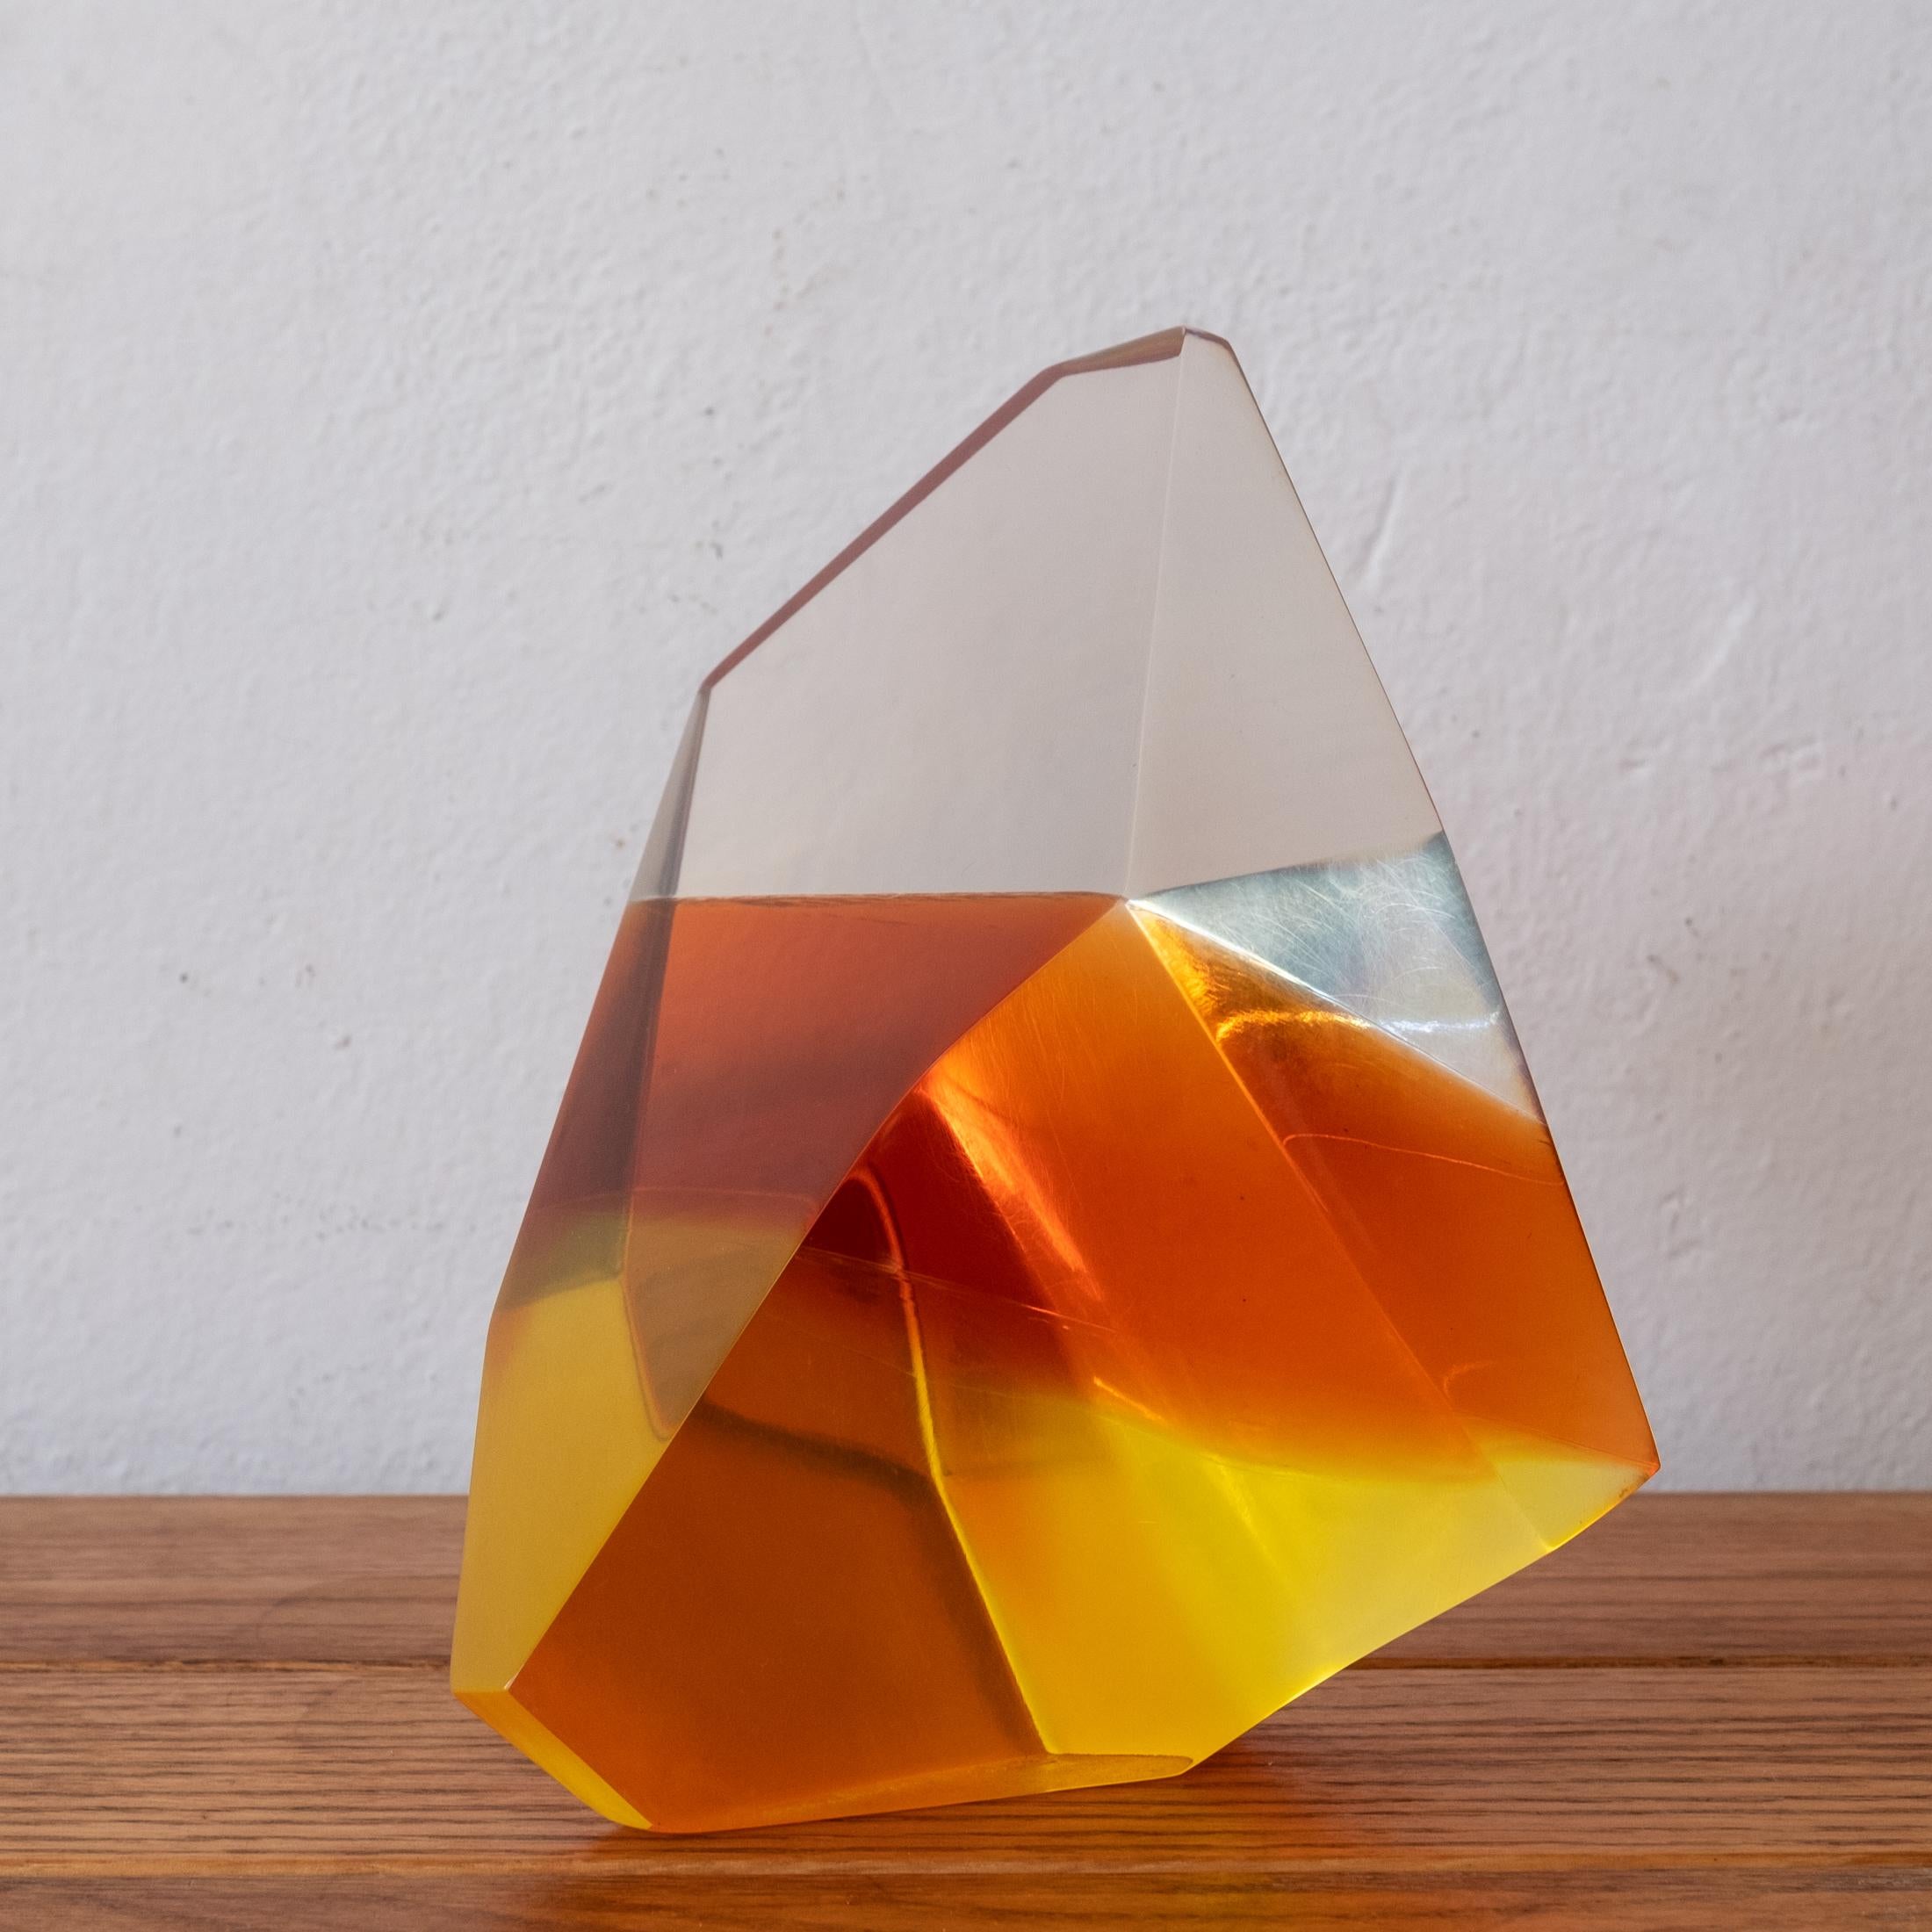 Multicolor resin sculpture by Louis Von Koelnau. Signed and dated, 1980

Louis Von Koelnau studied at the Minneapolis College of Art and Design and the Royal Academy of Art in Stockholm, Sweden, for a two-year graduate program.

From his